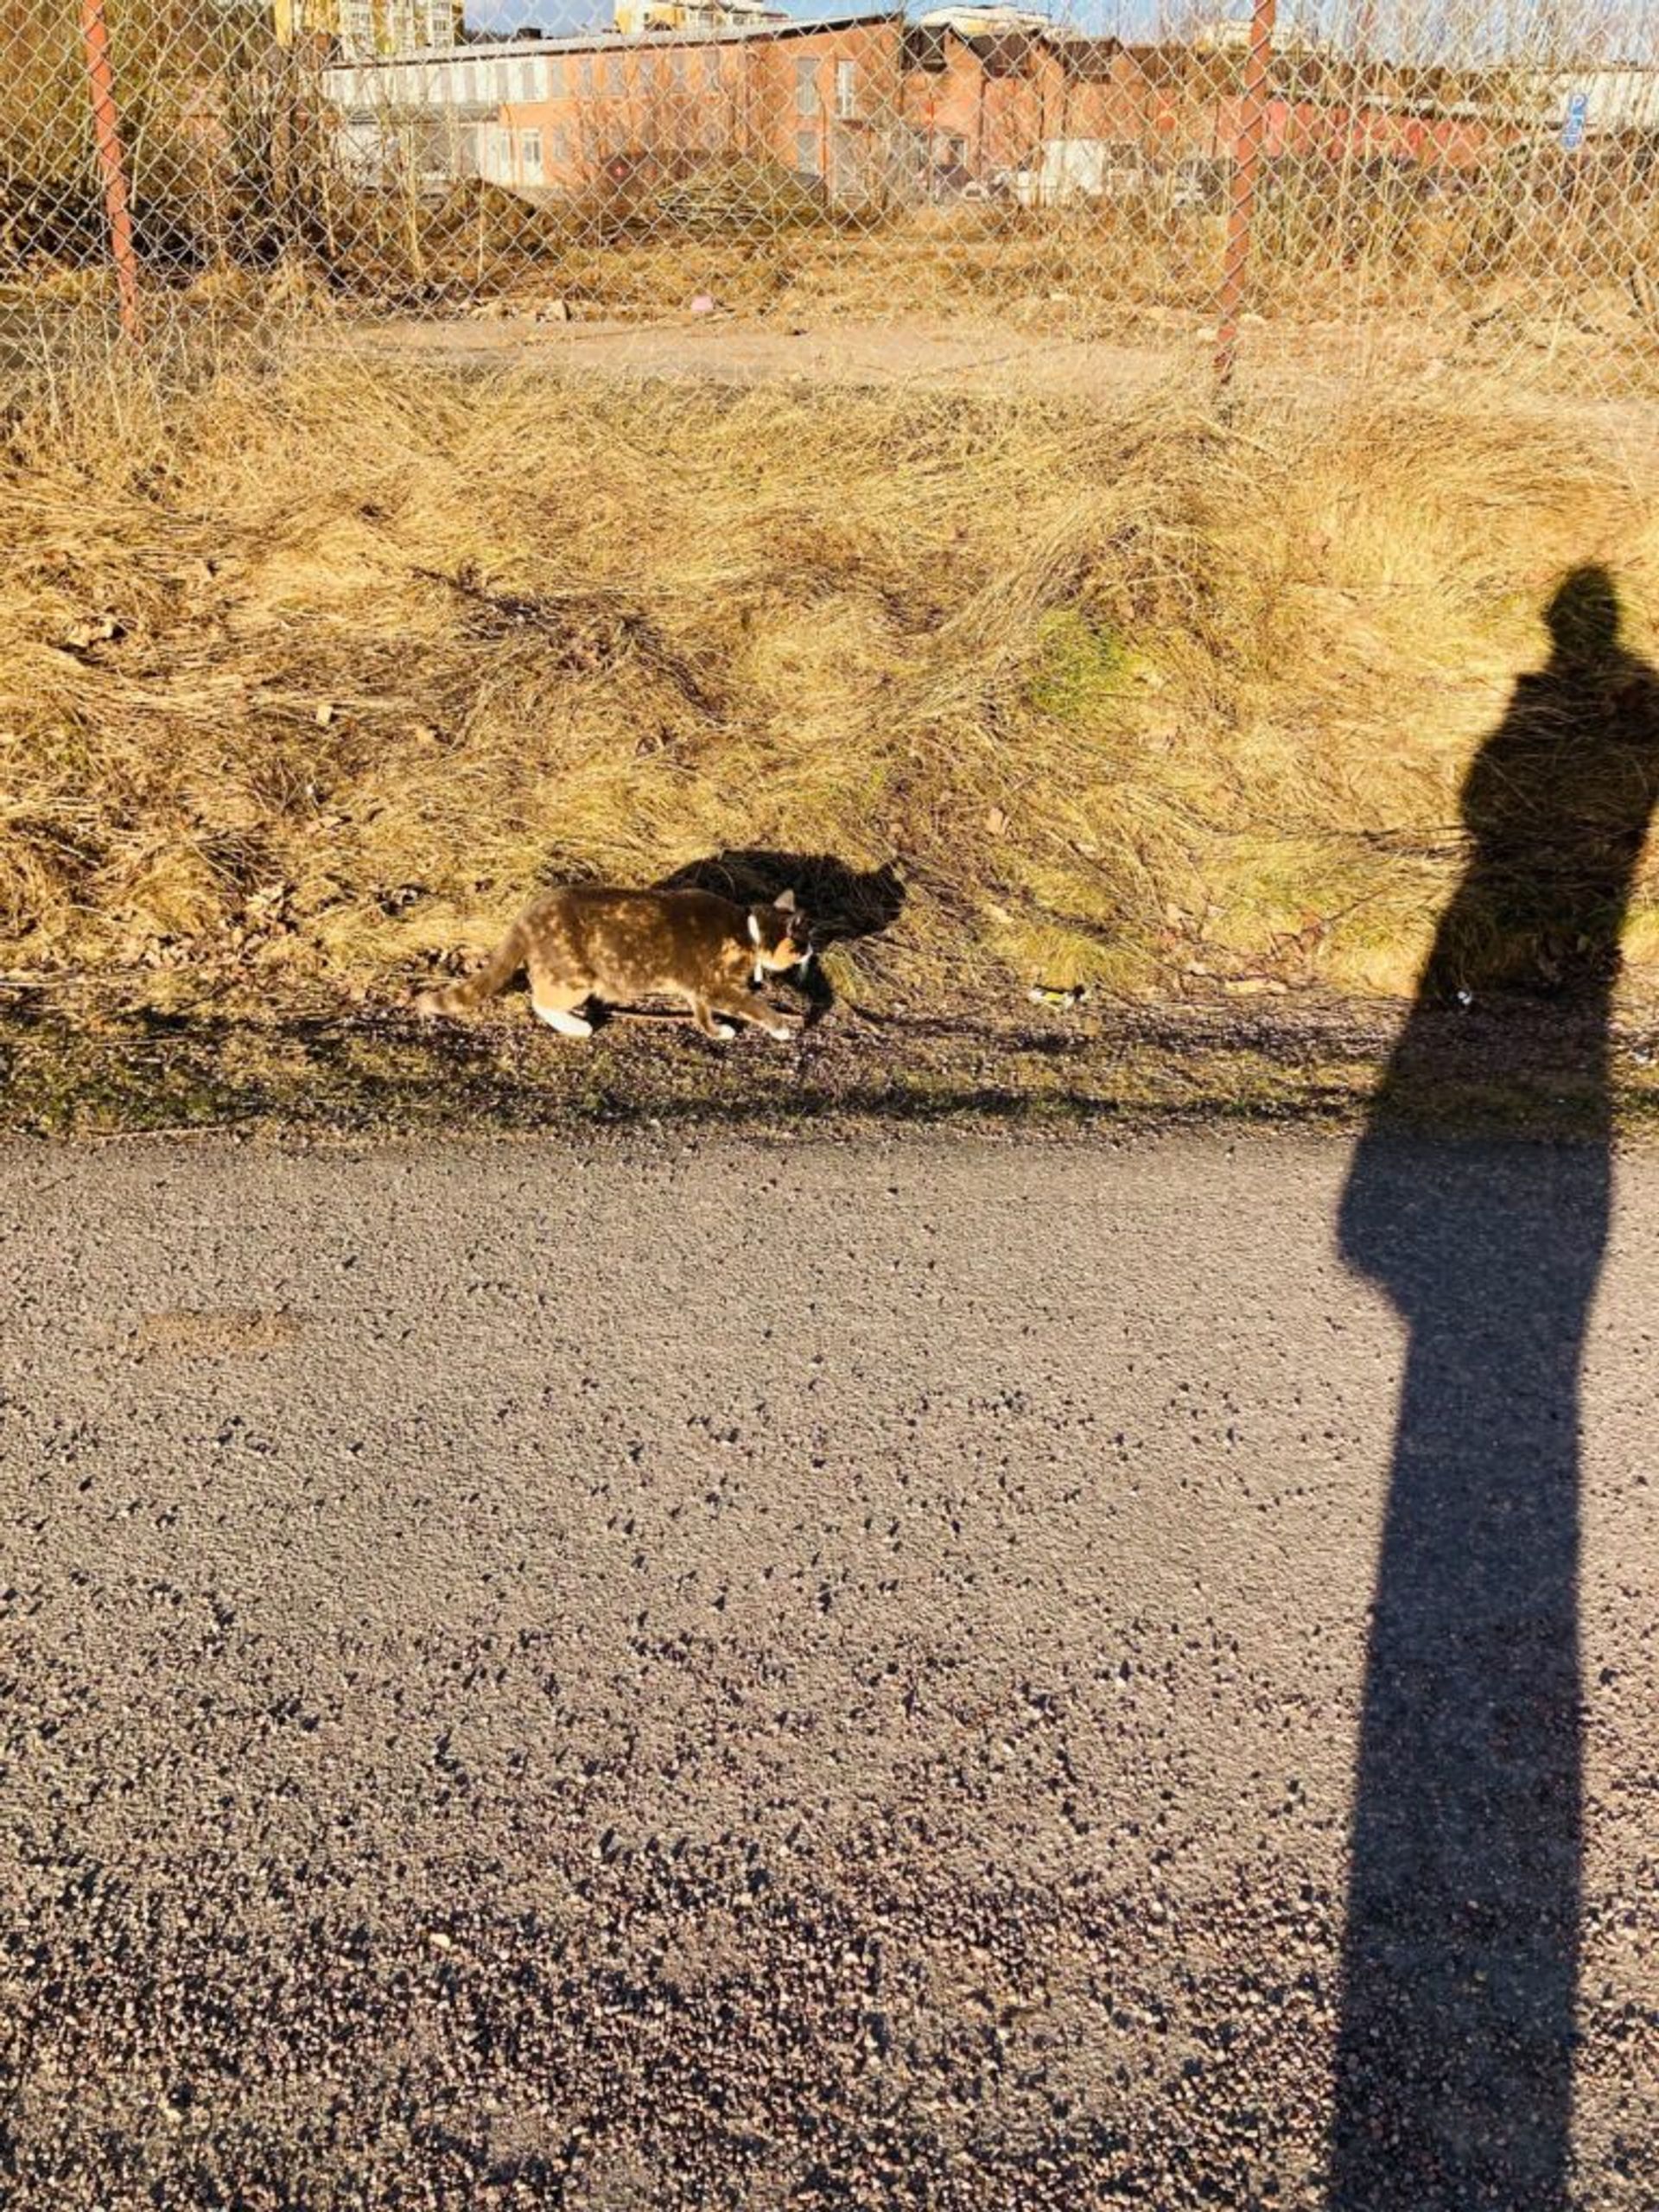 My shadow and cat in the distance.